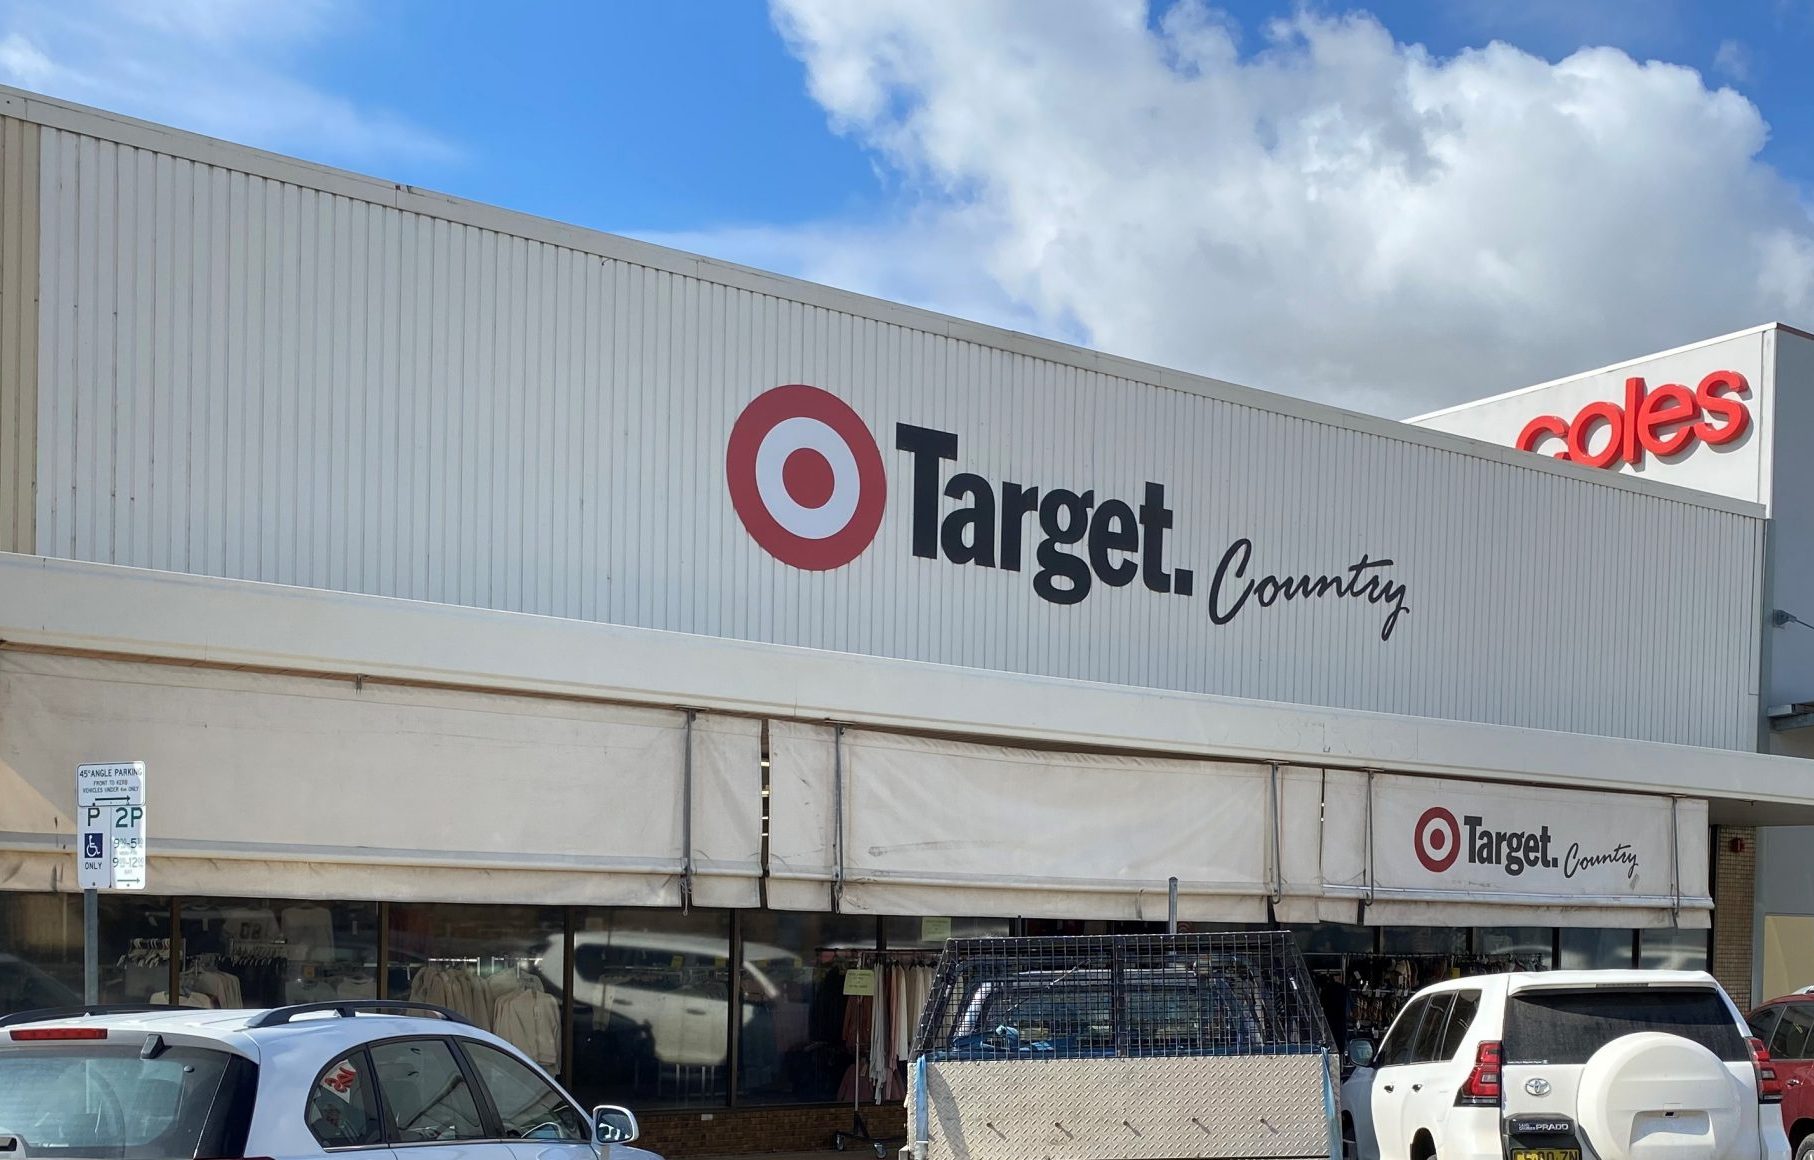 Council to fight closure: Narrabri Target Country store to close early next year